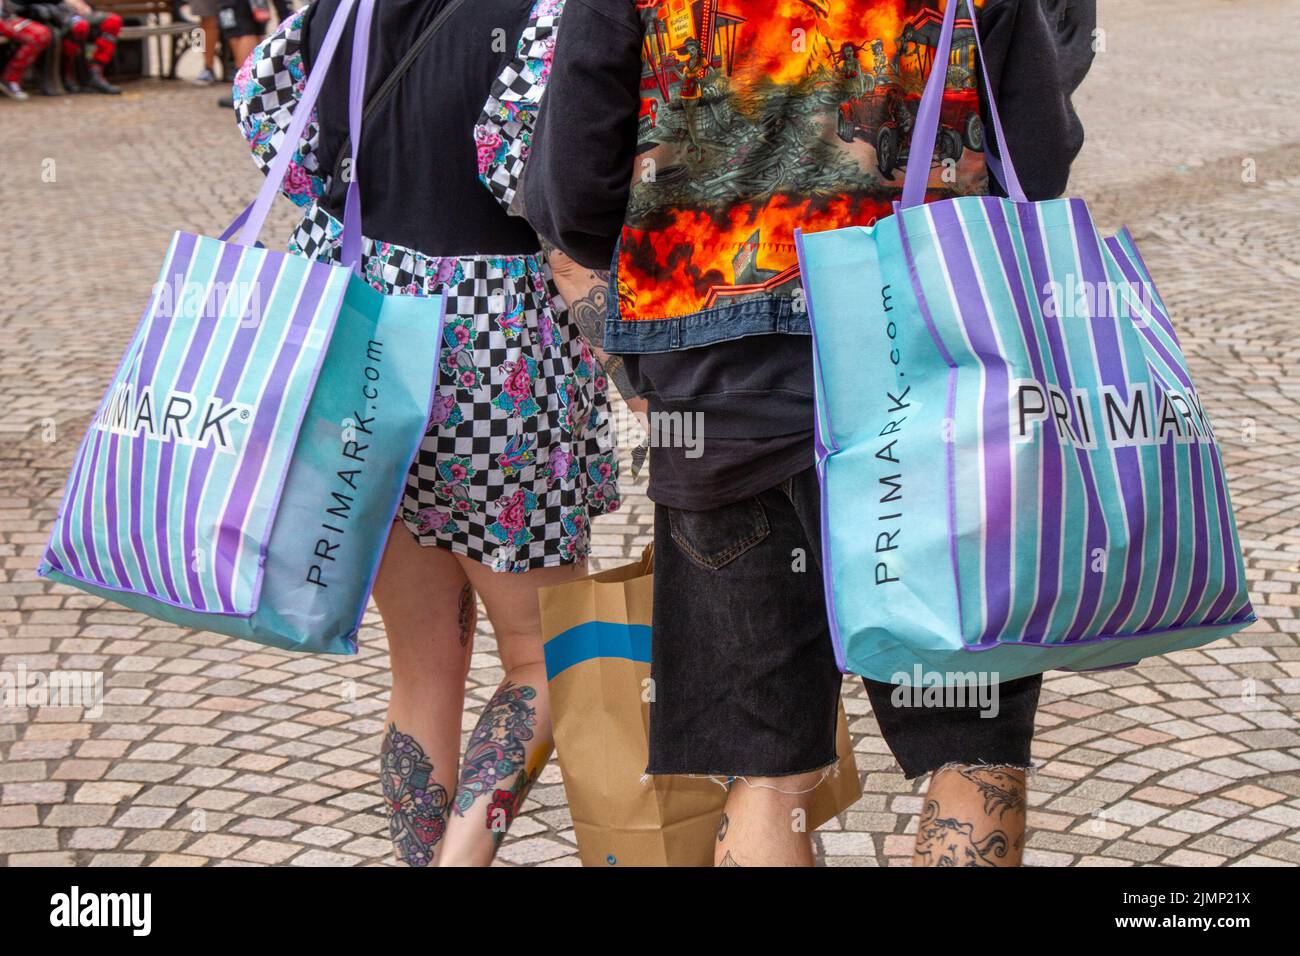 Tattooed Punk Rockers shopping, carrying Striped PRIMARK Bags in  Blackpool, UK Stock Photo